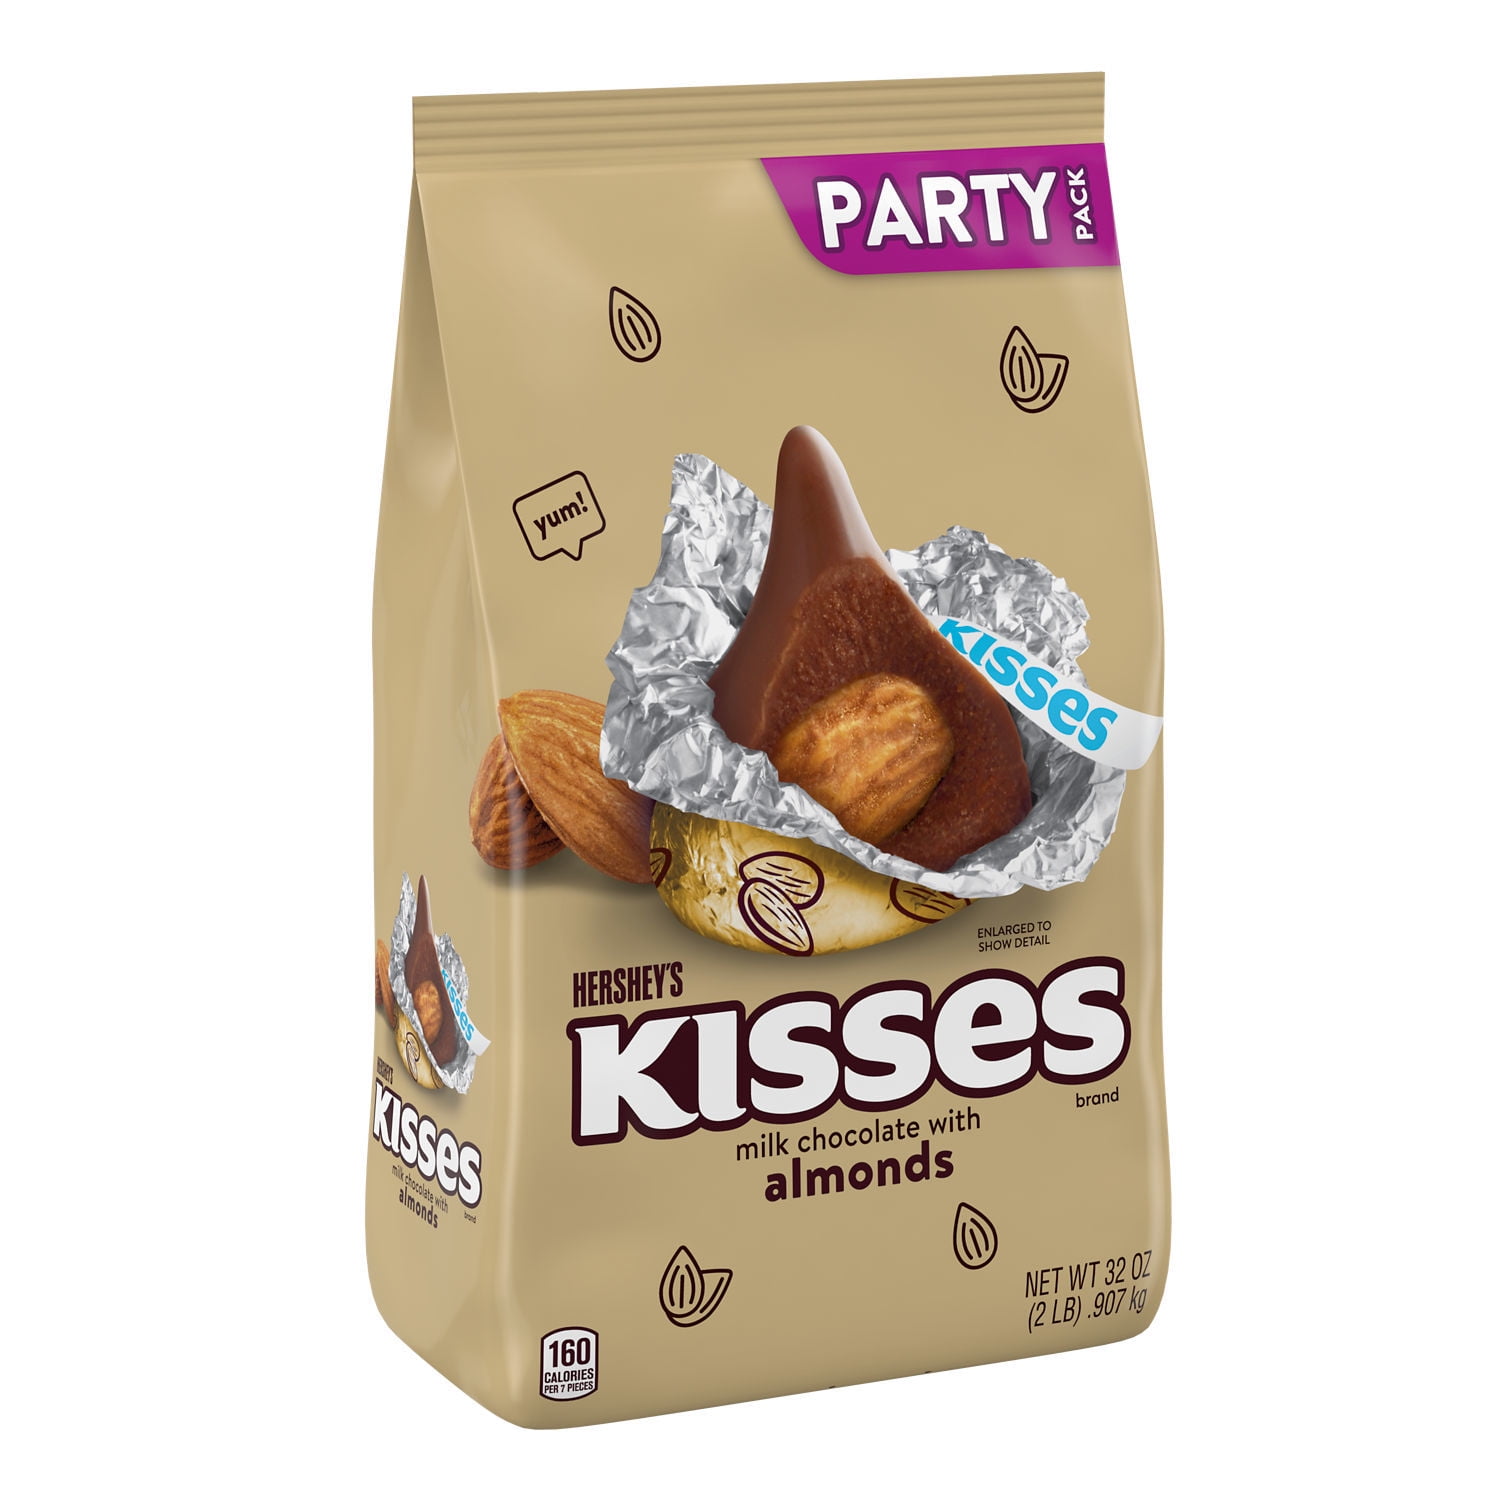 HERSHEY'S, KISSES Milk Chocolate with Almonds Candy ...